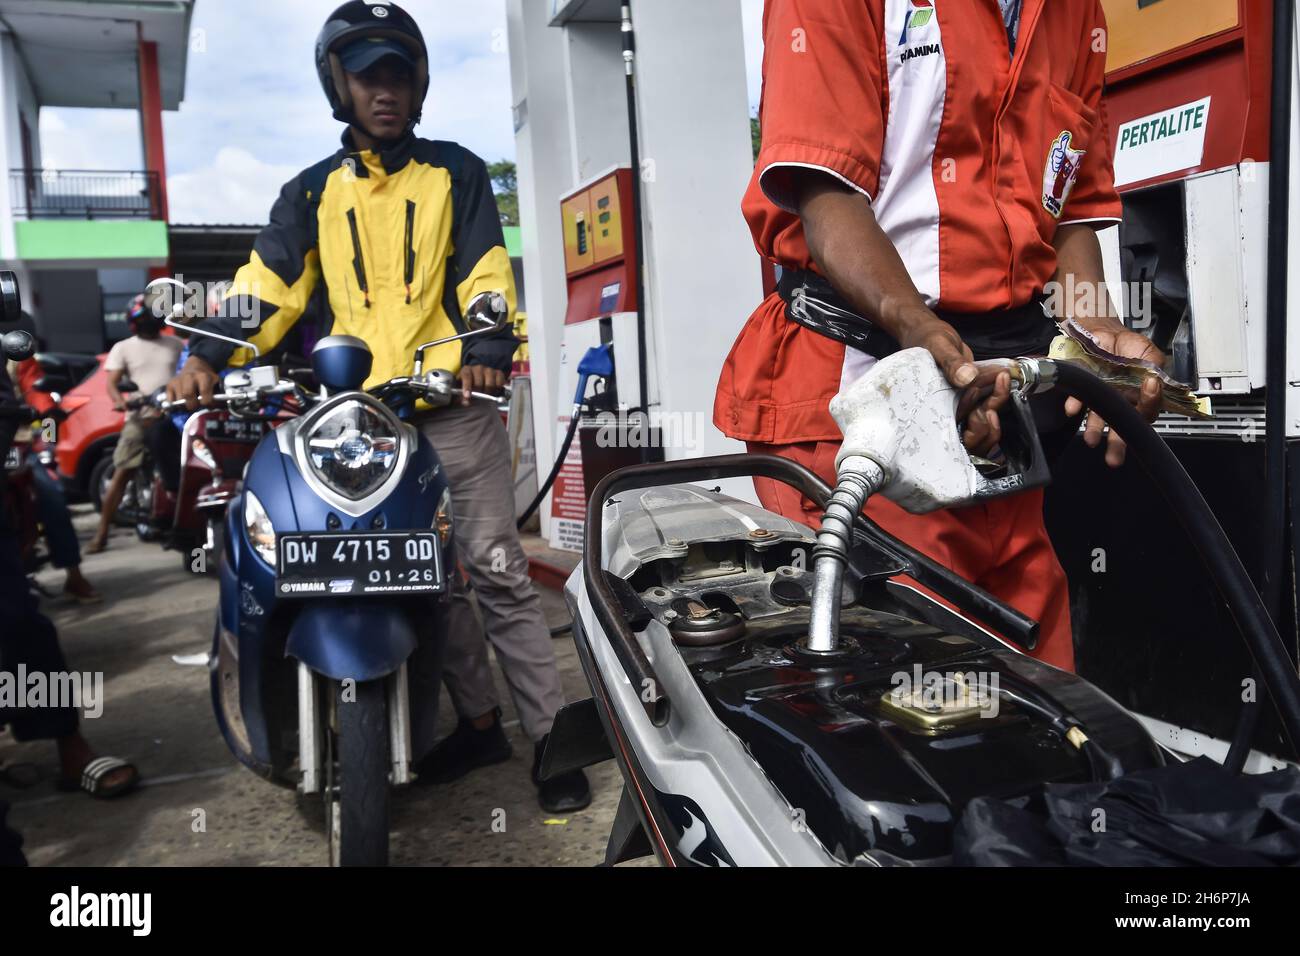 Soppeng, South Sulawesi, Indonesia. 17th Nov, 2021. Motorcyclists refuel at the PT Pertamina gas station in Soppeng. Indonesia's crude oil price rose to US$ 81.8 per barrel from September which was in the range of US$ 72.2 per barrel. Meanwhile, the price of West Texas Intermediate (WTI) oil for December 2021 delivery on the New York Mercantile Exchange was around US$ 81.07 per barrel, up 0.35% from last weekend at US$ 80.79 per barrel. (Credit Image: © Moch Farabi Wardana/Pacific Press via ZUMA Press Wire) Stock Photo